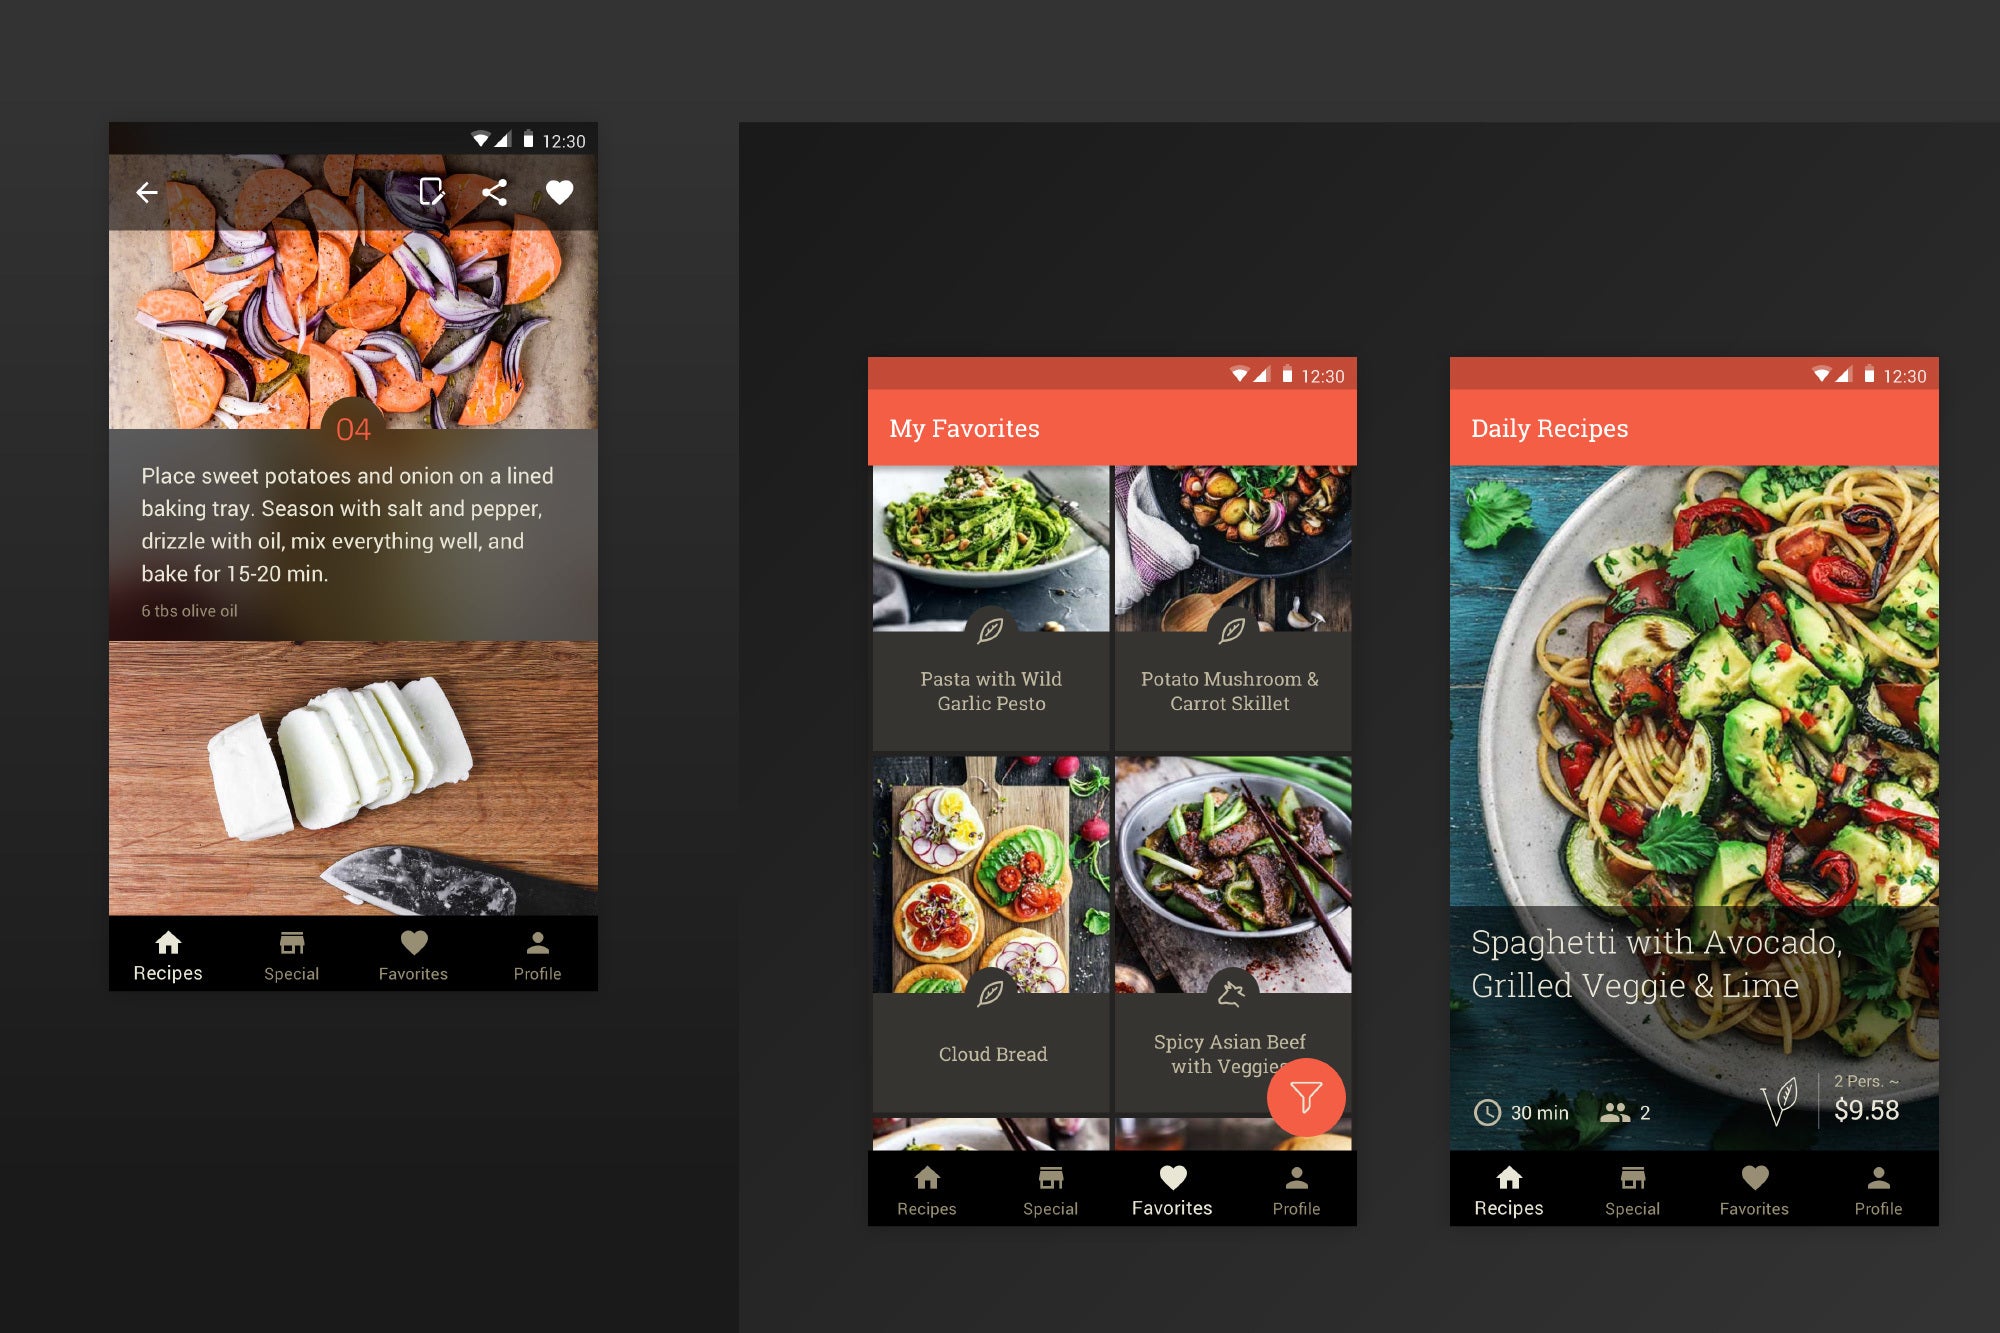 KptnCook, 2018 Material Design Award winner for expression - Google names four apps as its 2018 Material Design Award winners